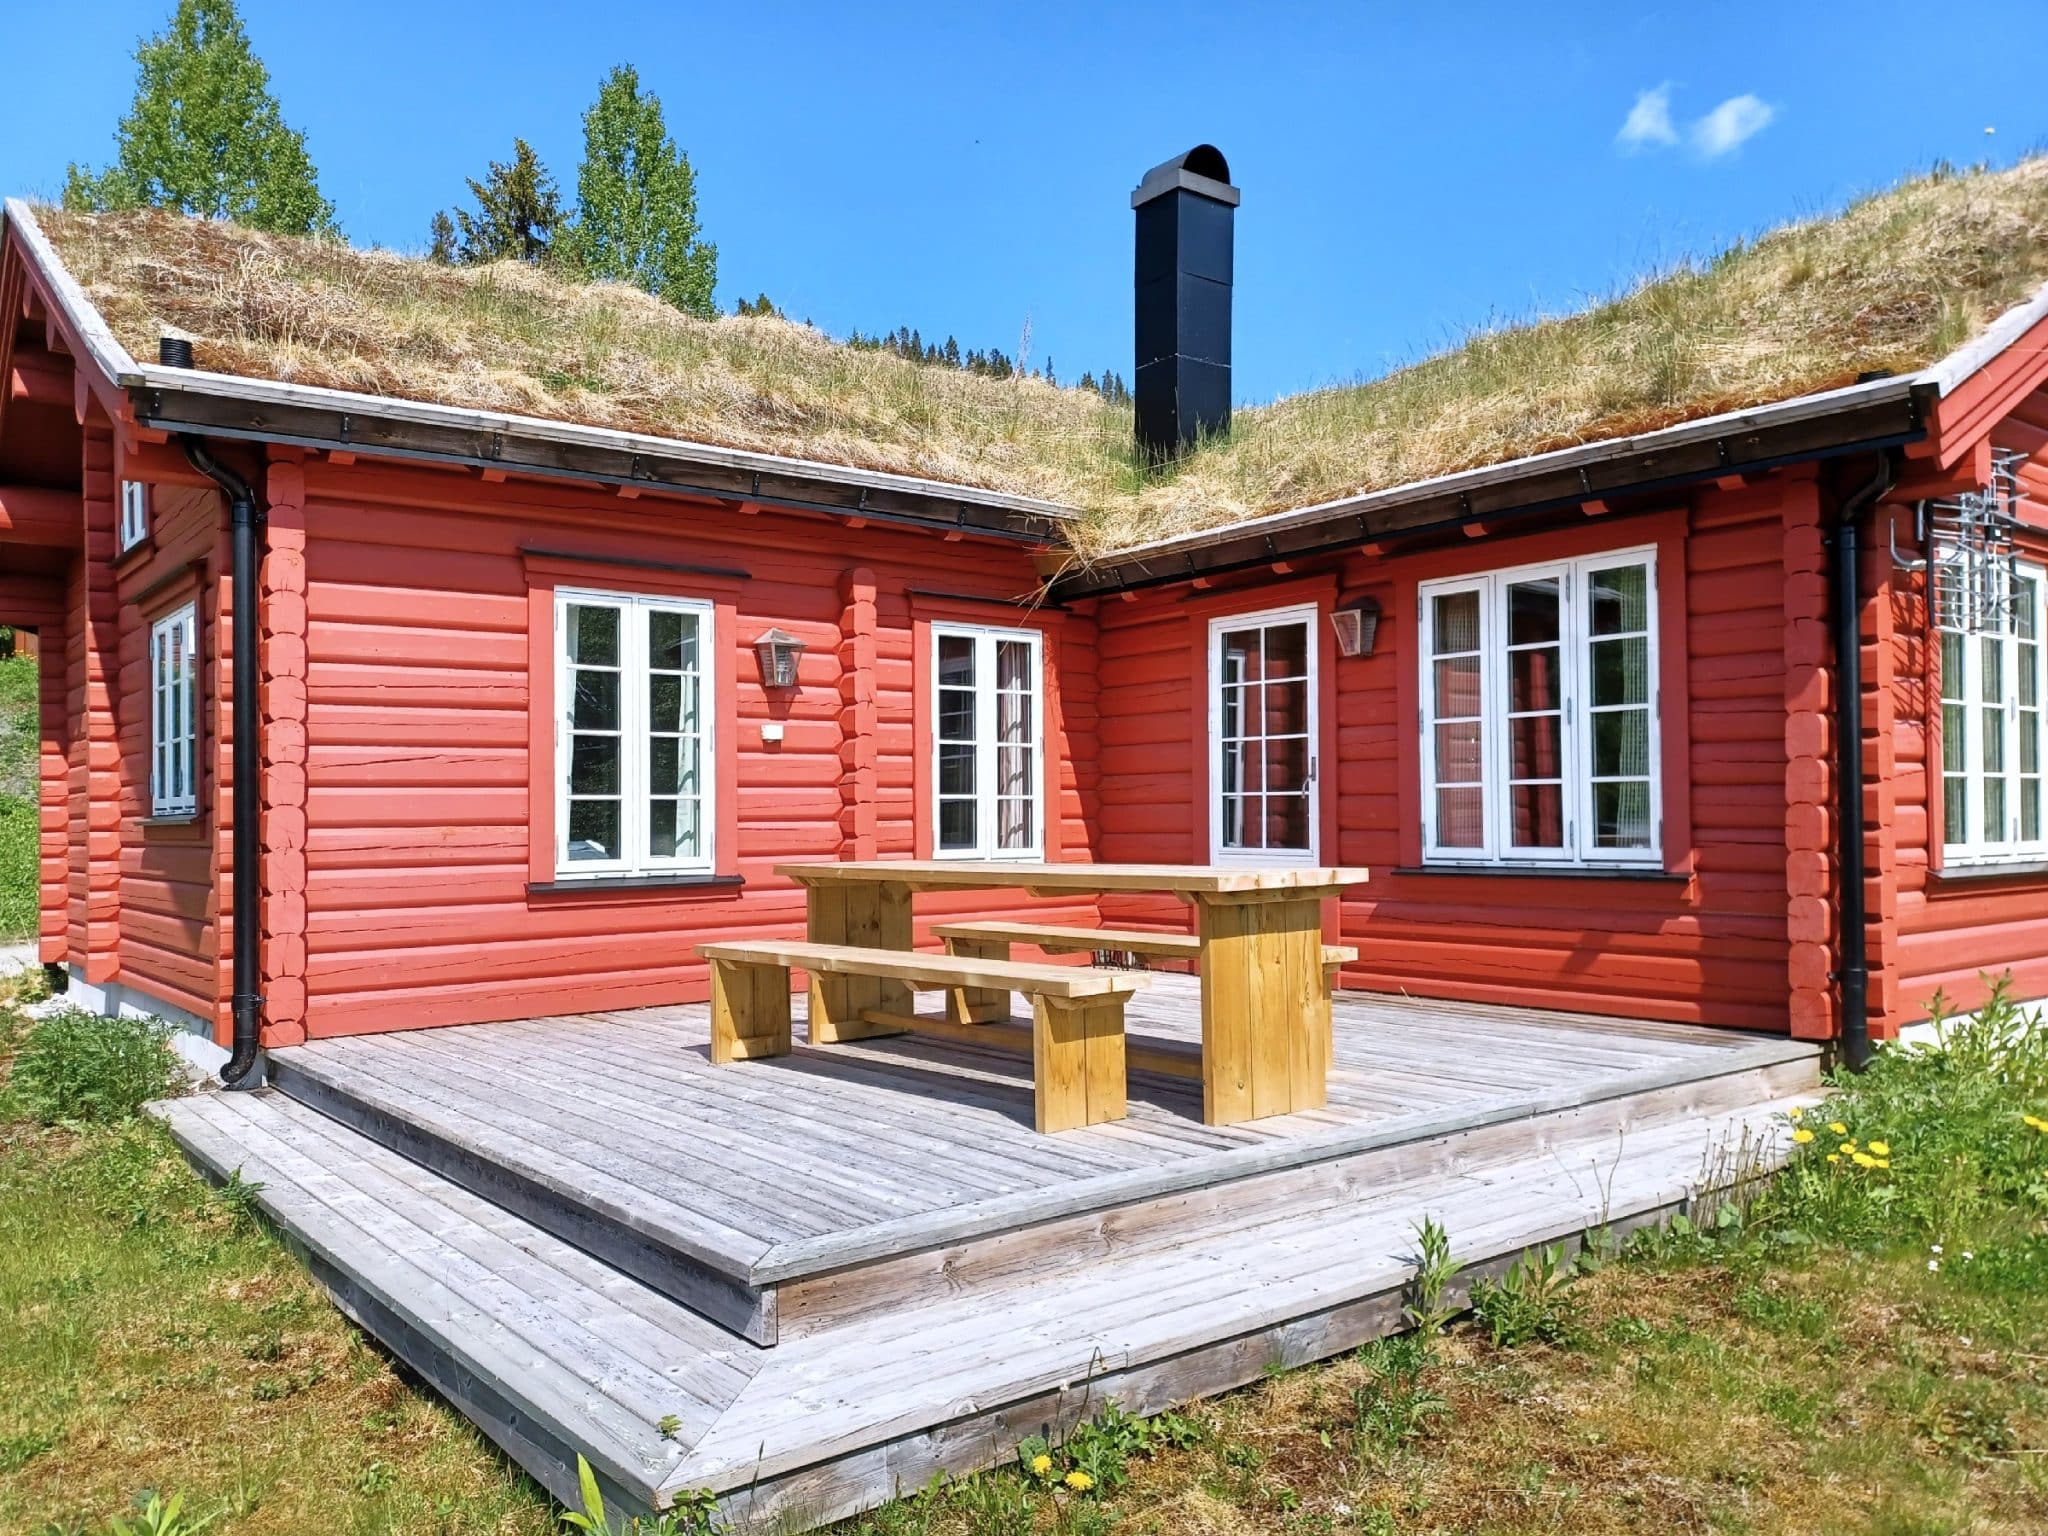 Wooden deck with wooden outdoor furniture at a red log cabin built at an angle. One-story house with sedum roof. A tall black chimney on the roof. White window frames and moldings. Black lanterns as wall lighting. Green lawn and blue summer sky.